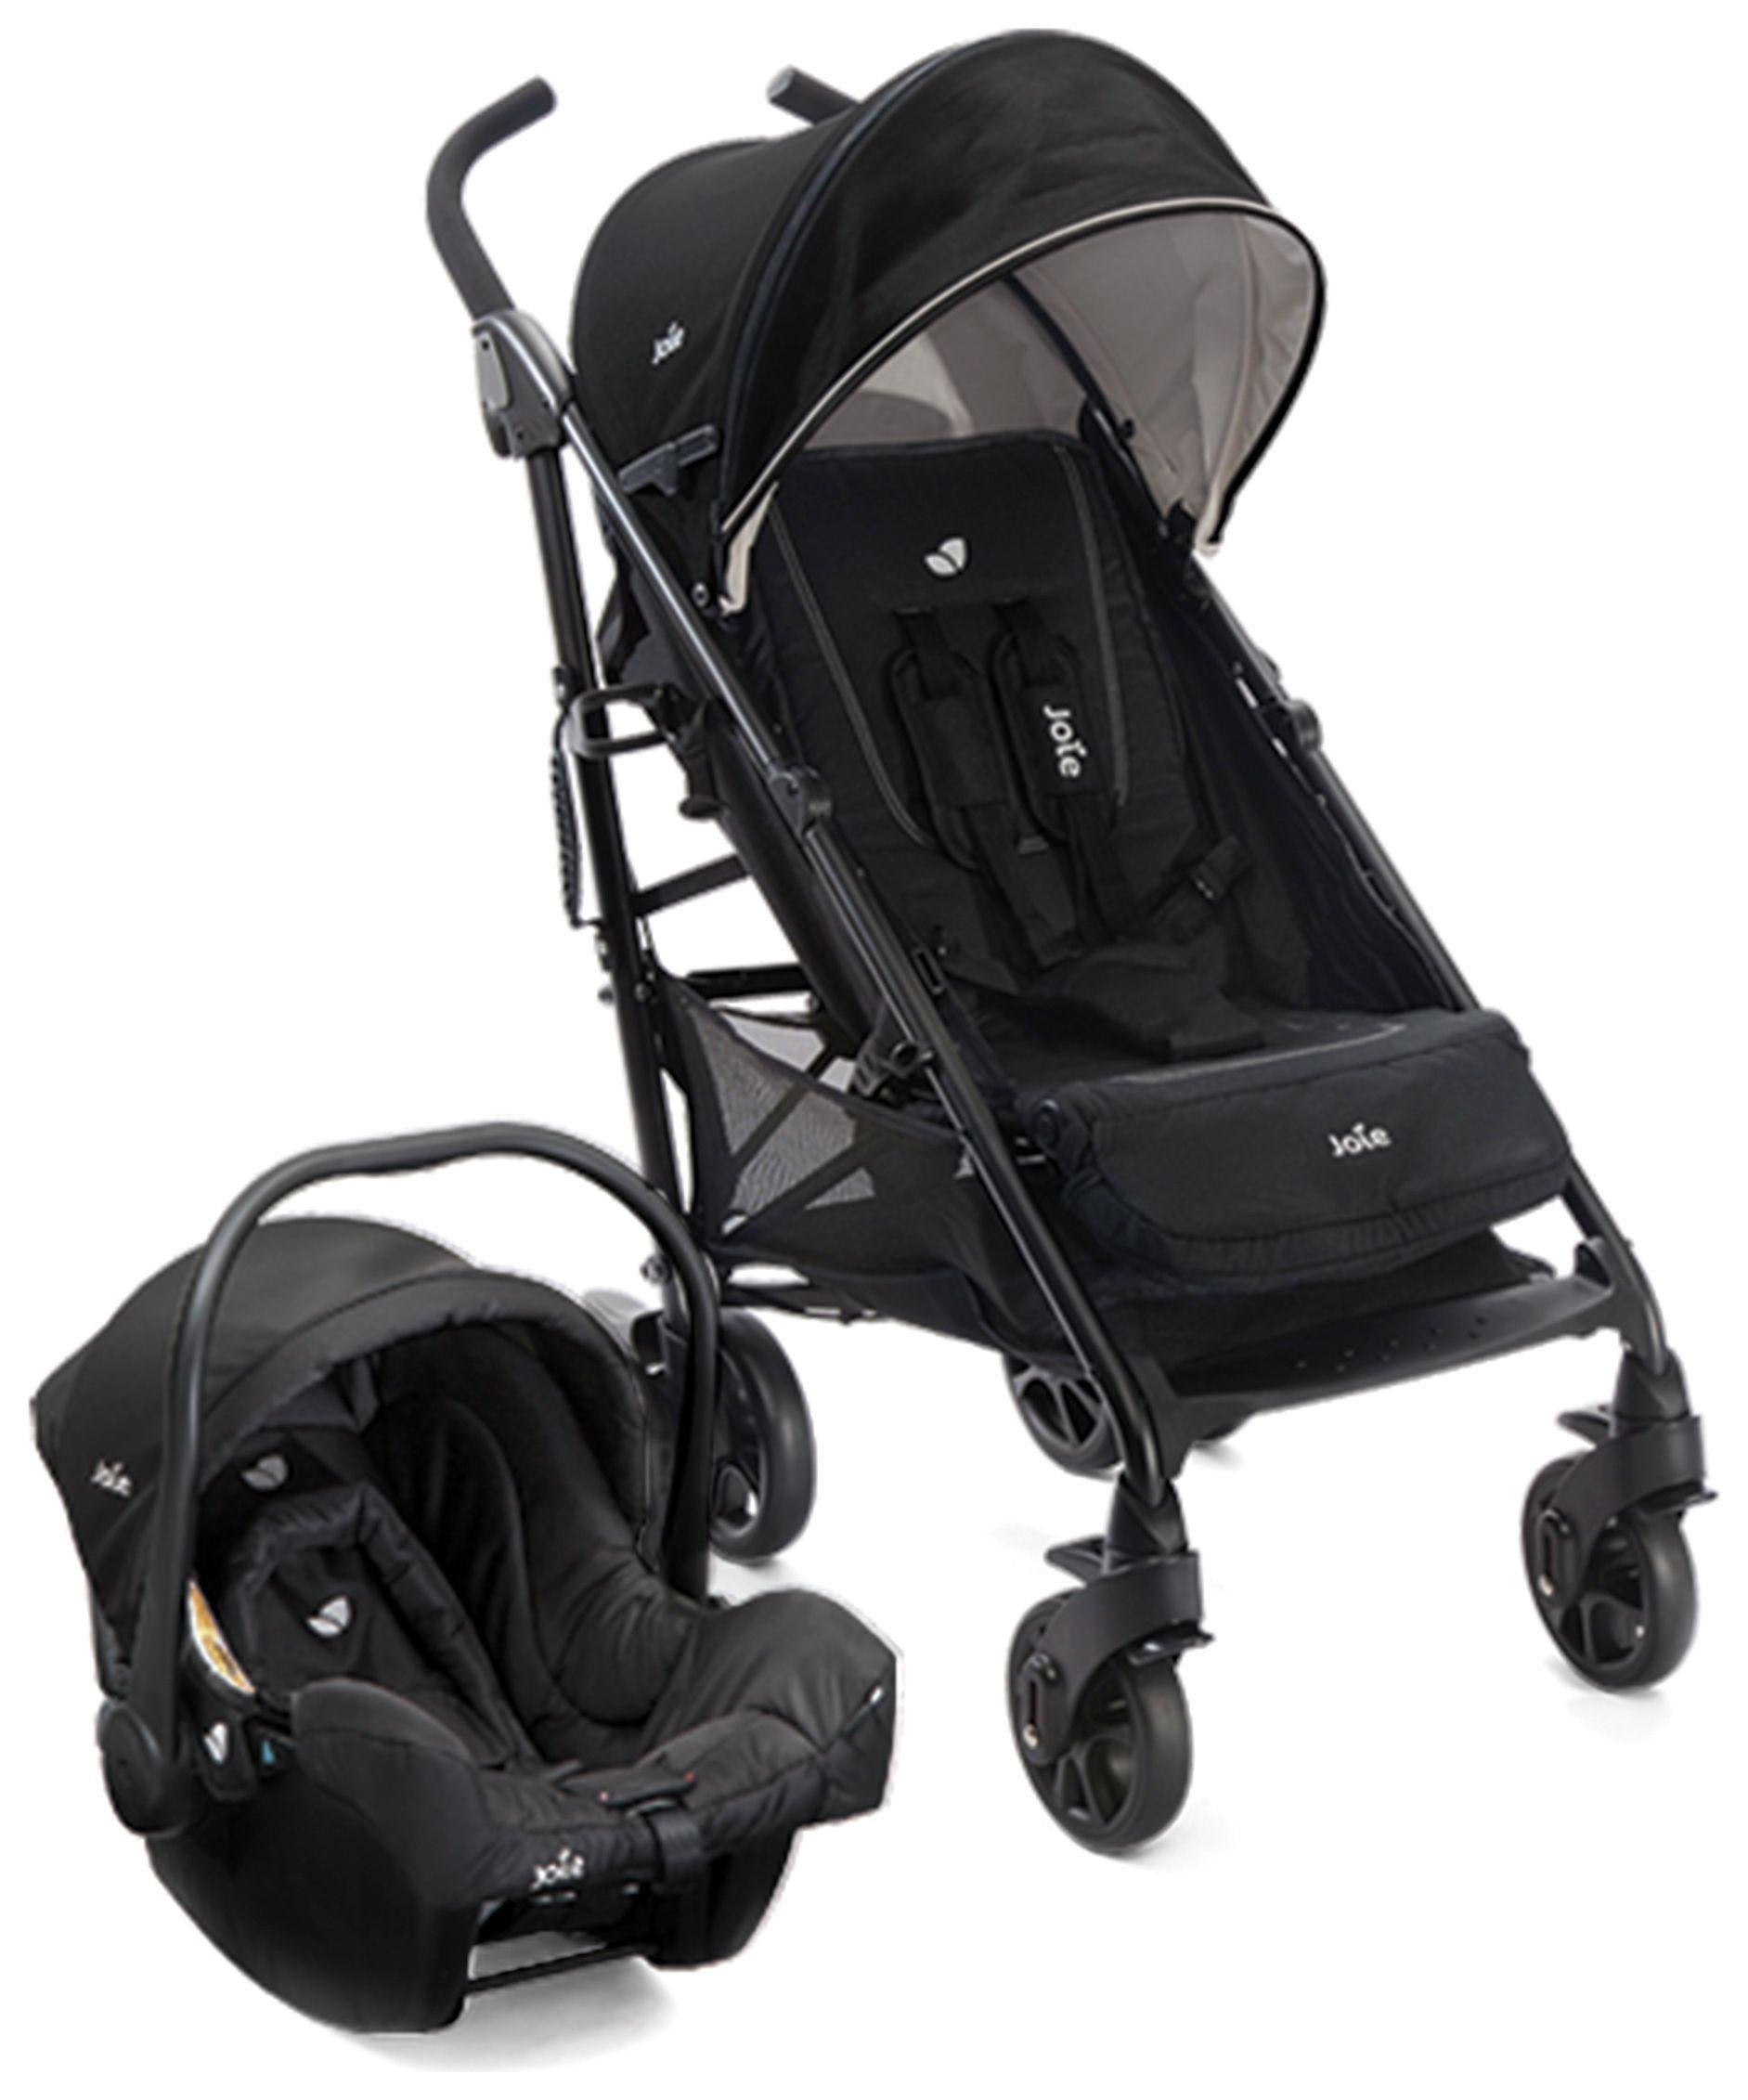 Review of Joie Brisk Black Travel System